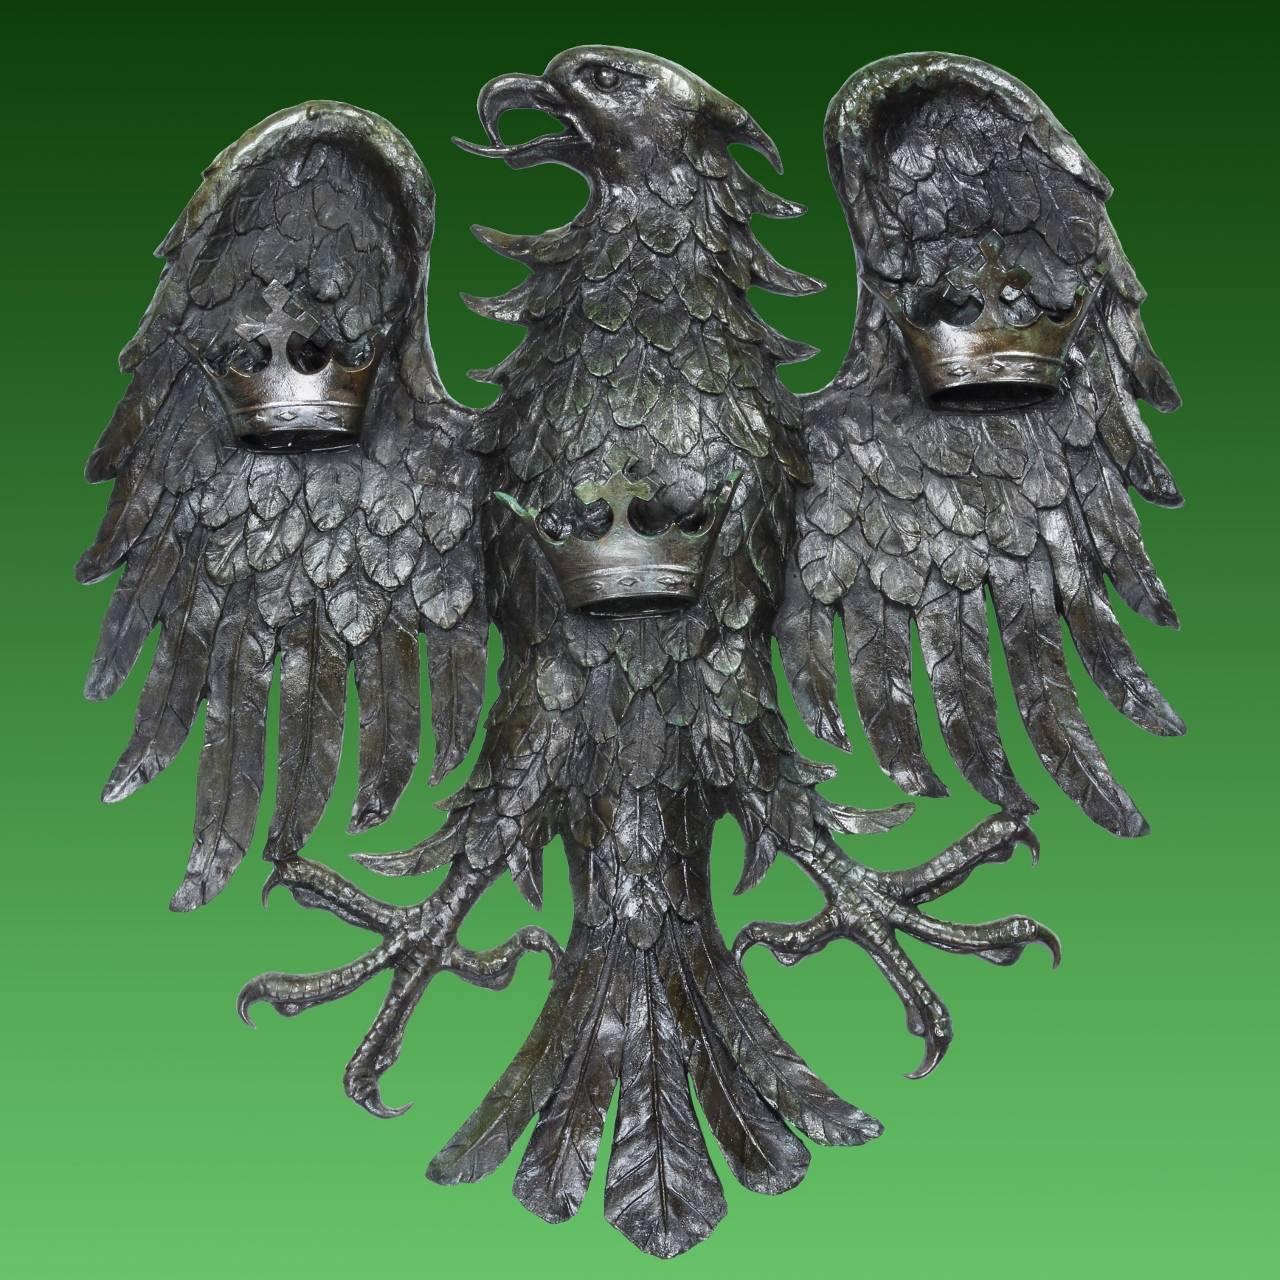 A very large and substantially heavy-cast bronze of a Spread Eagle, the symbol synonymous with the banking institution Barclays. With its original green-brown patina, this high-relief bronze most likely came from outside a branch or office, and